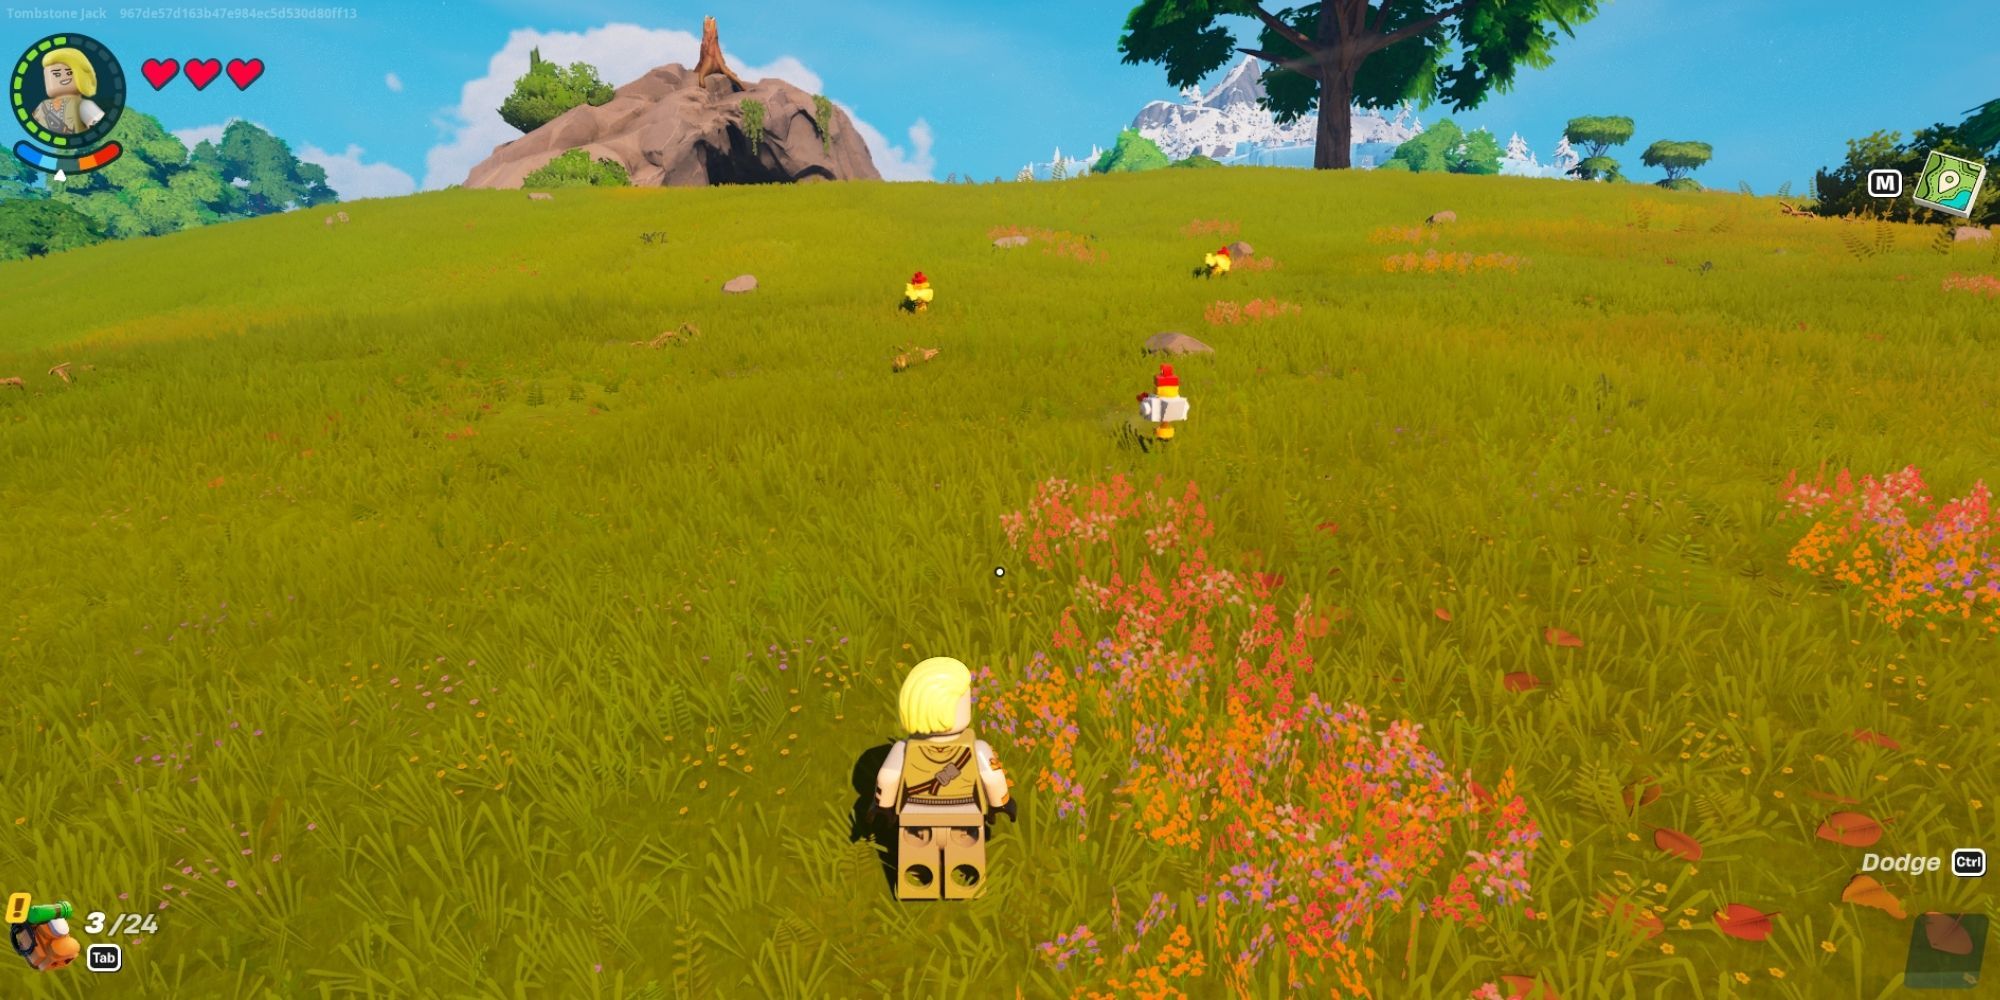 LEGO Fortnite player character finding Chickens